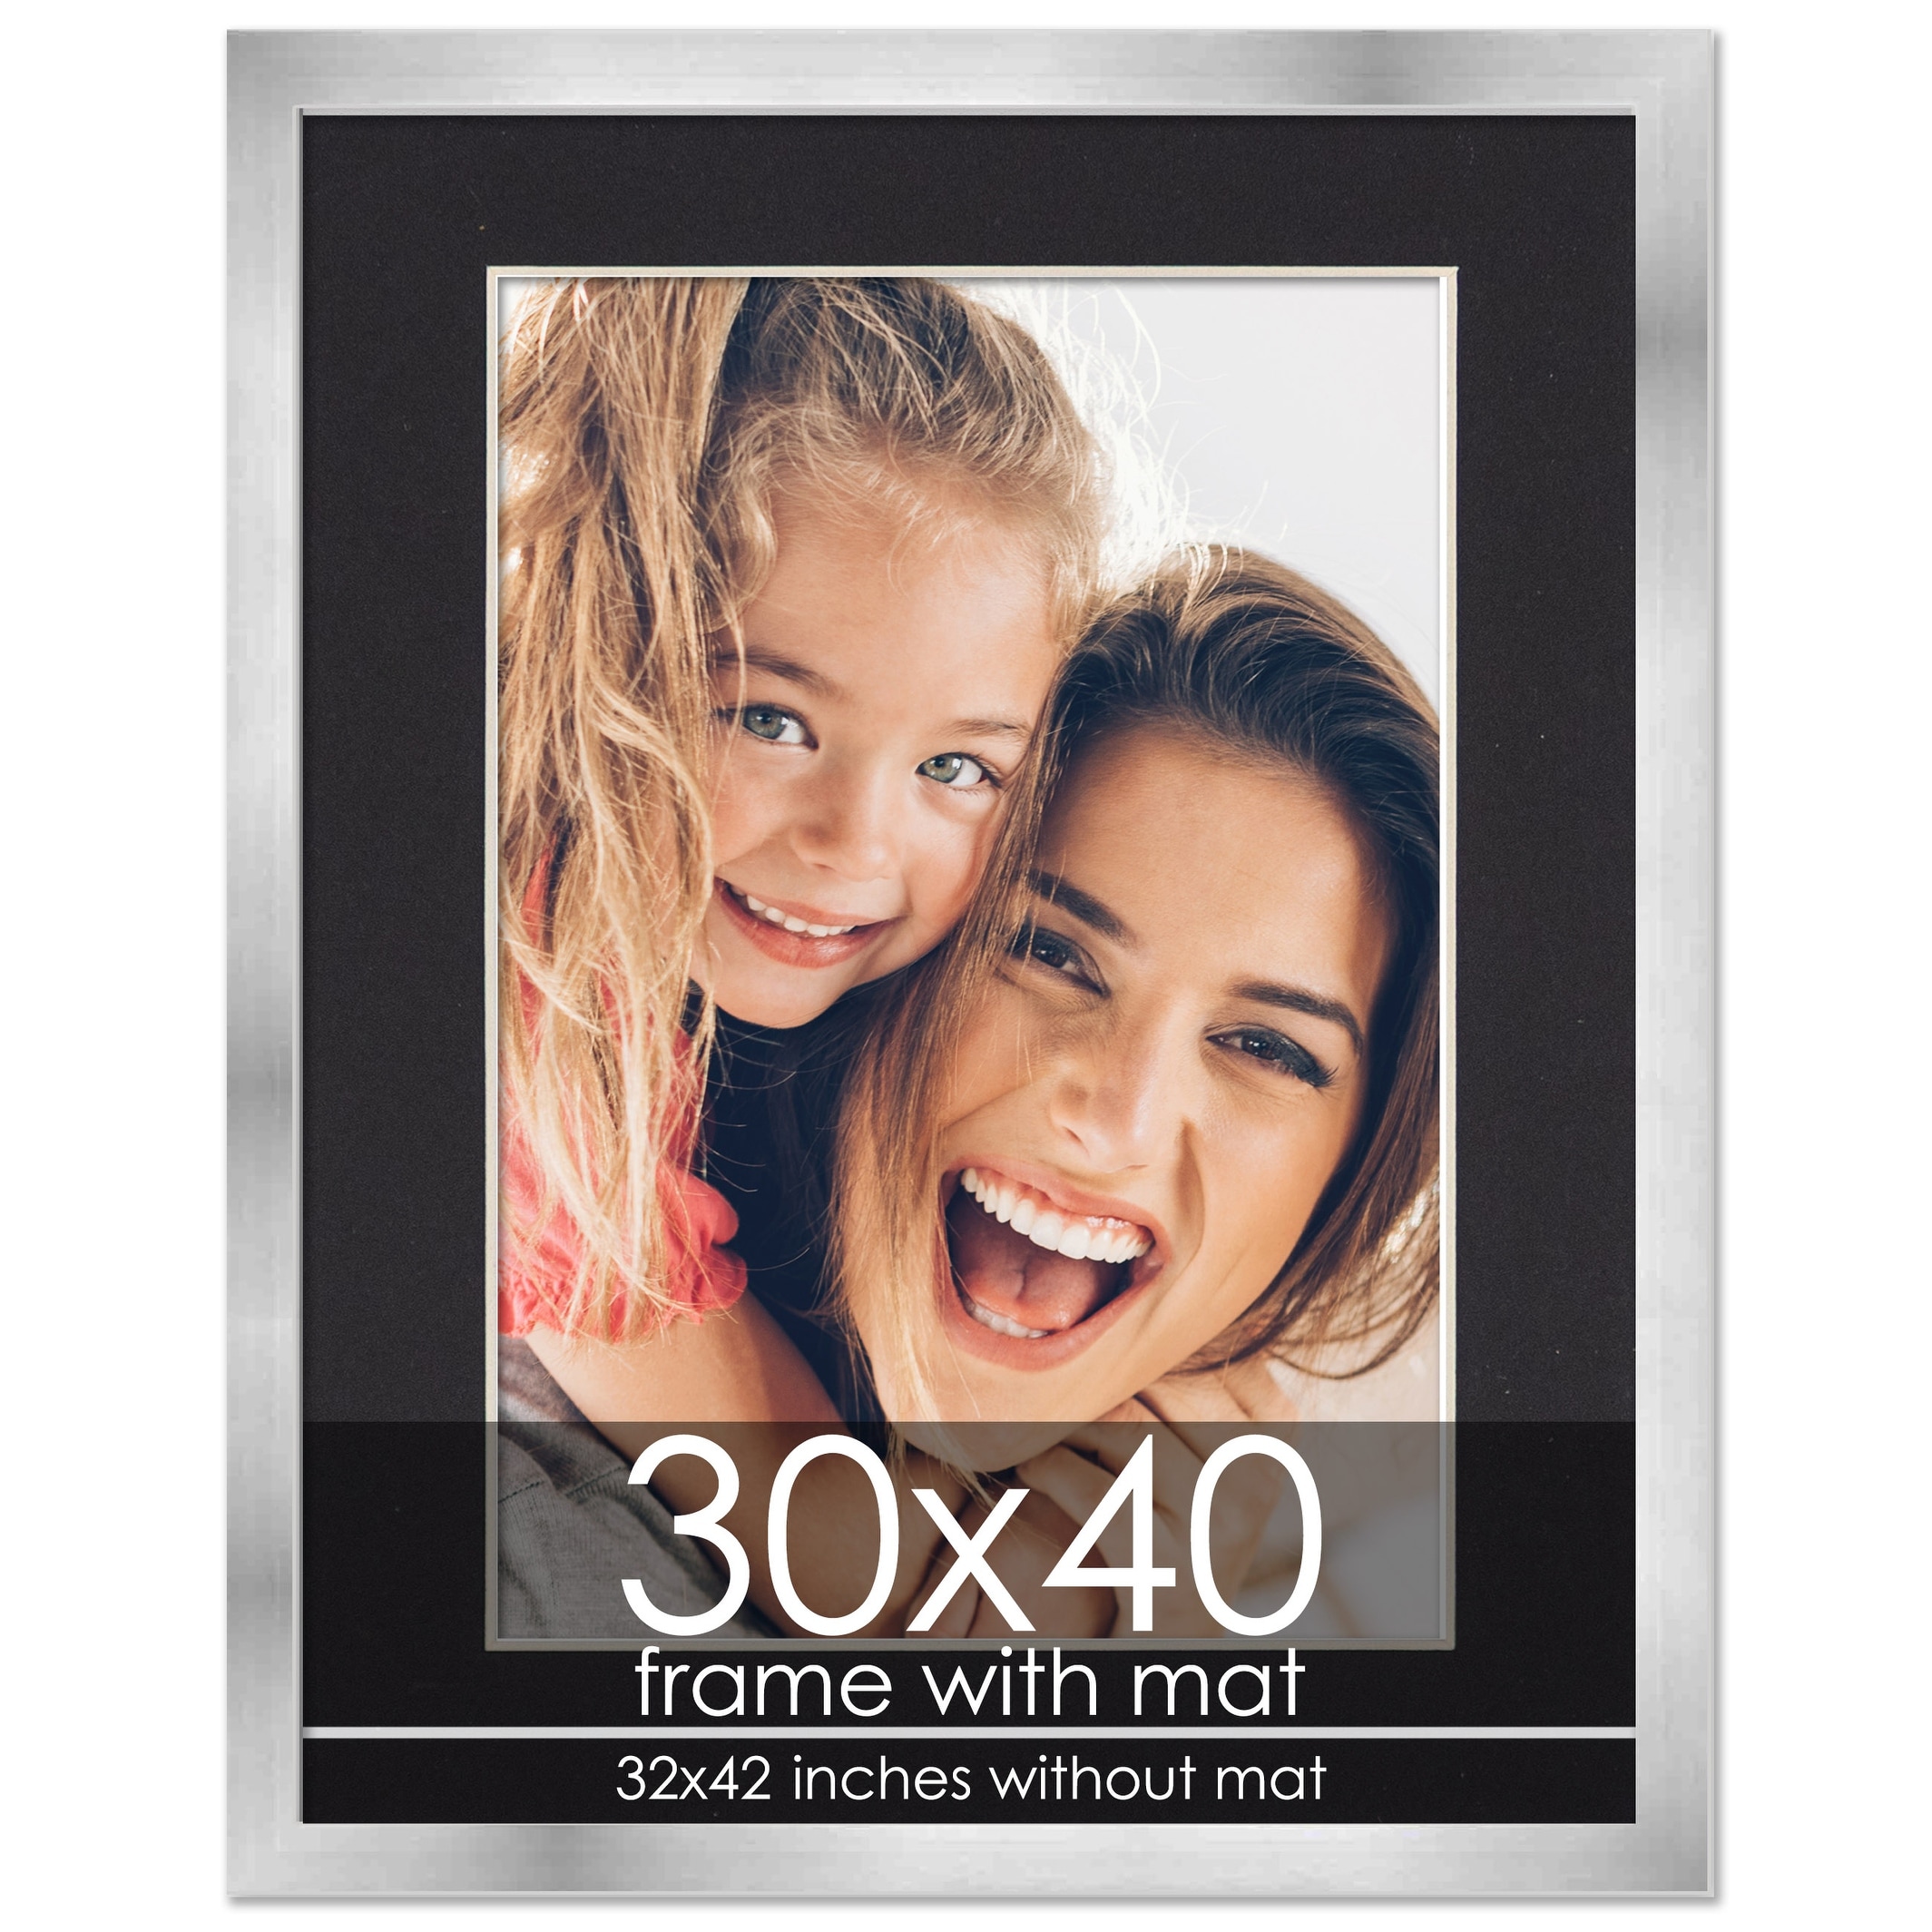 30x40 Frame with Mat - Silver 32x42 Frame Wood Made to Display Print or Poster Measuring 30 x 40 Inches with Black Photo Mat